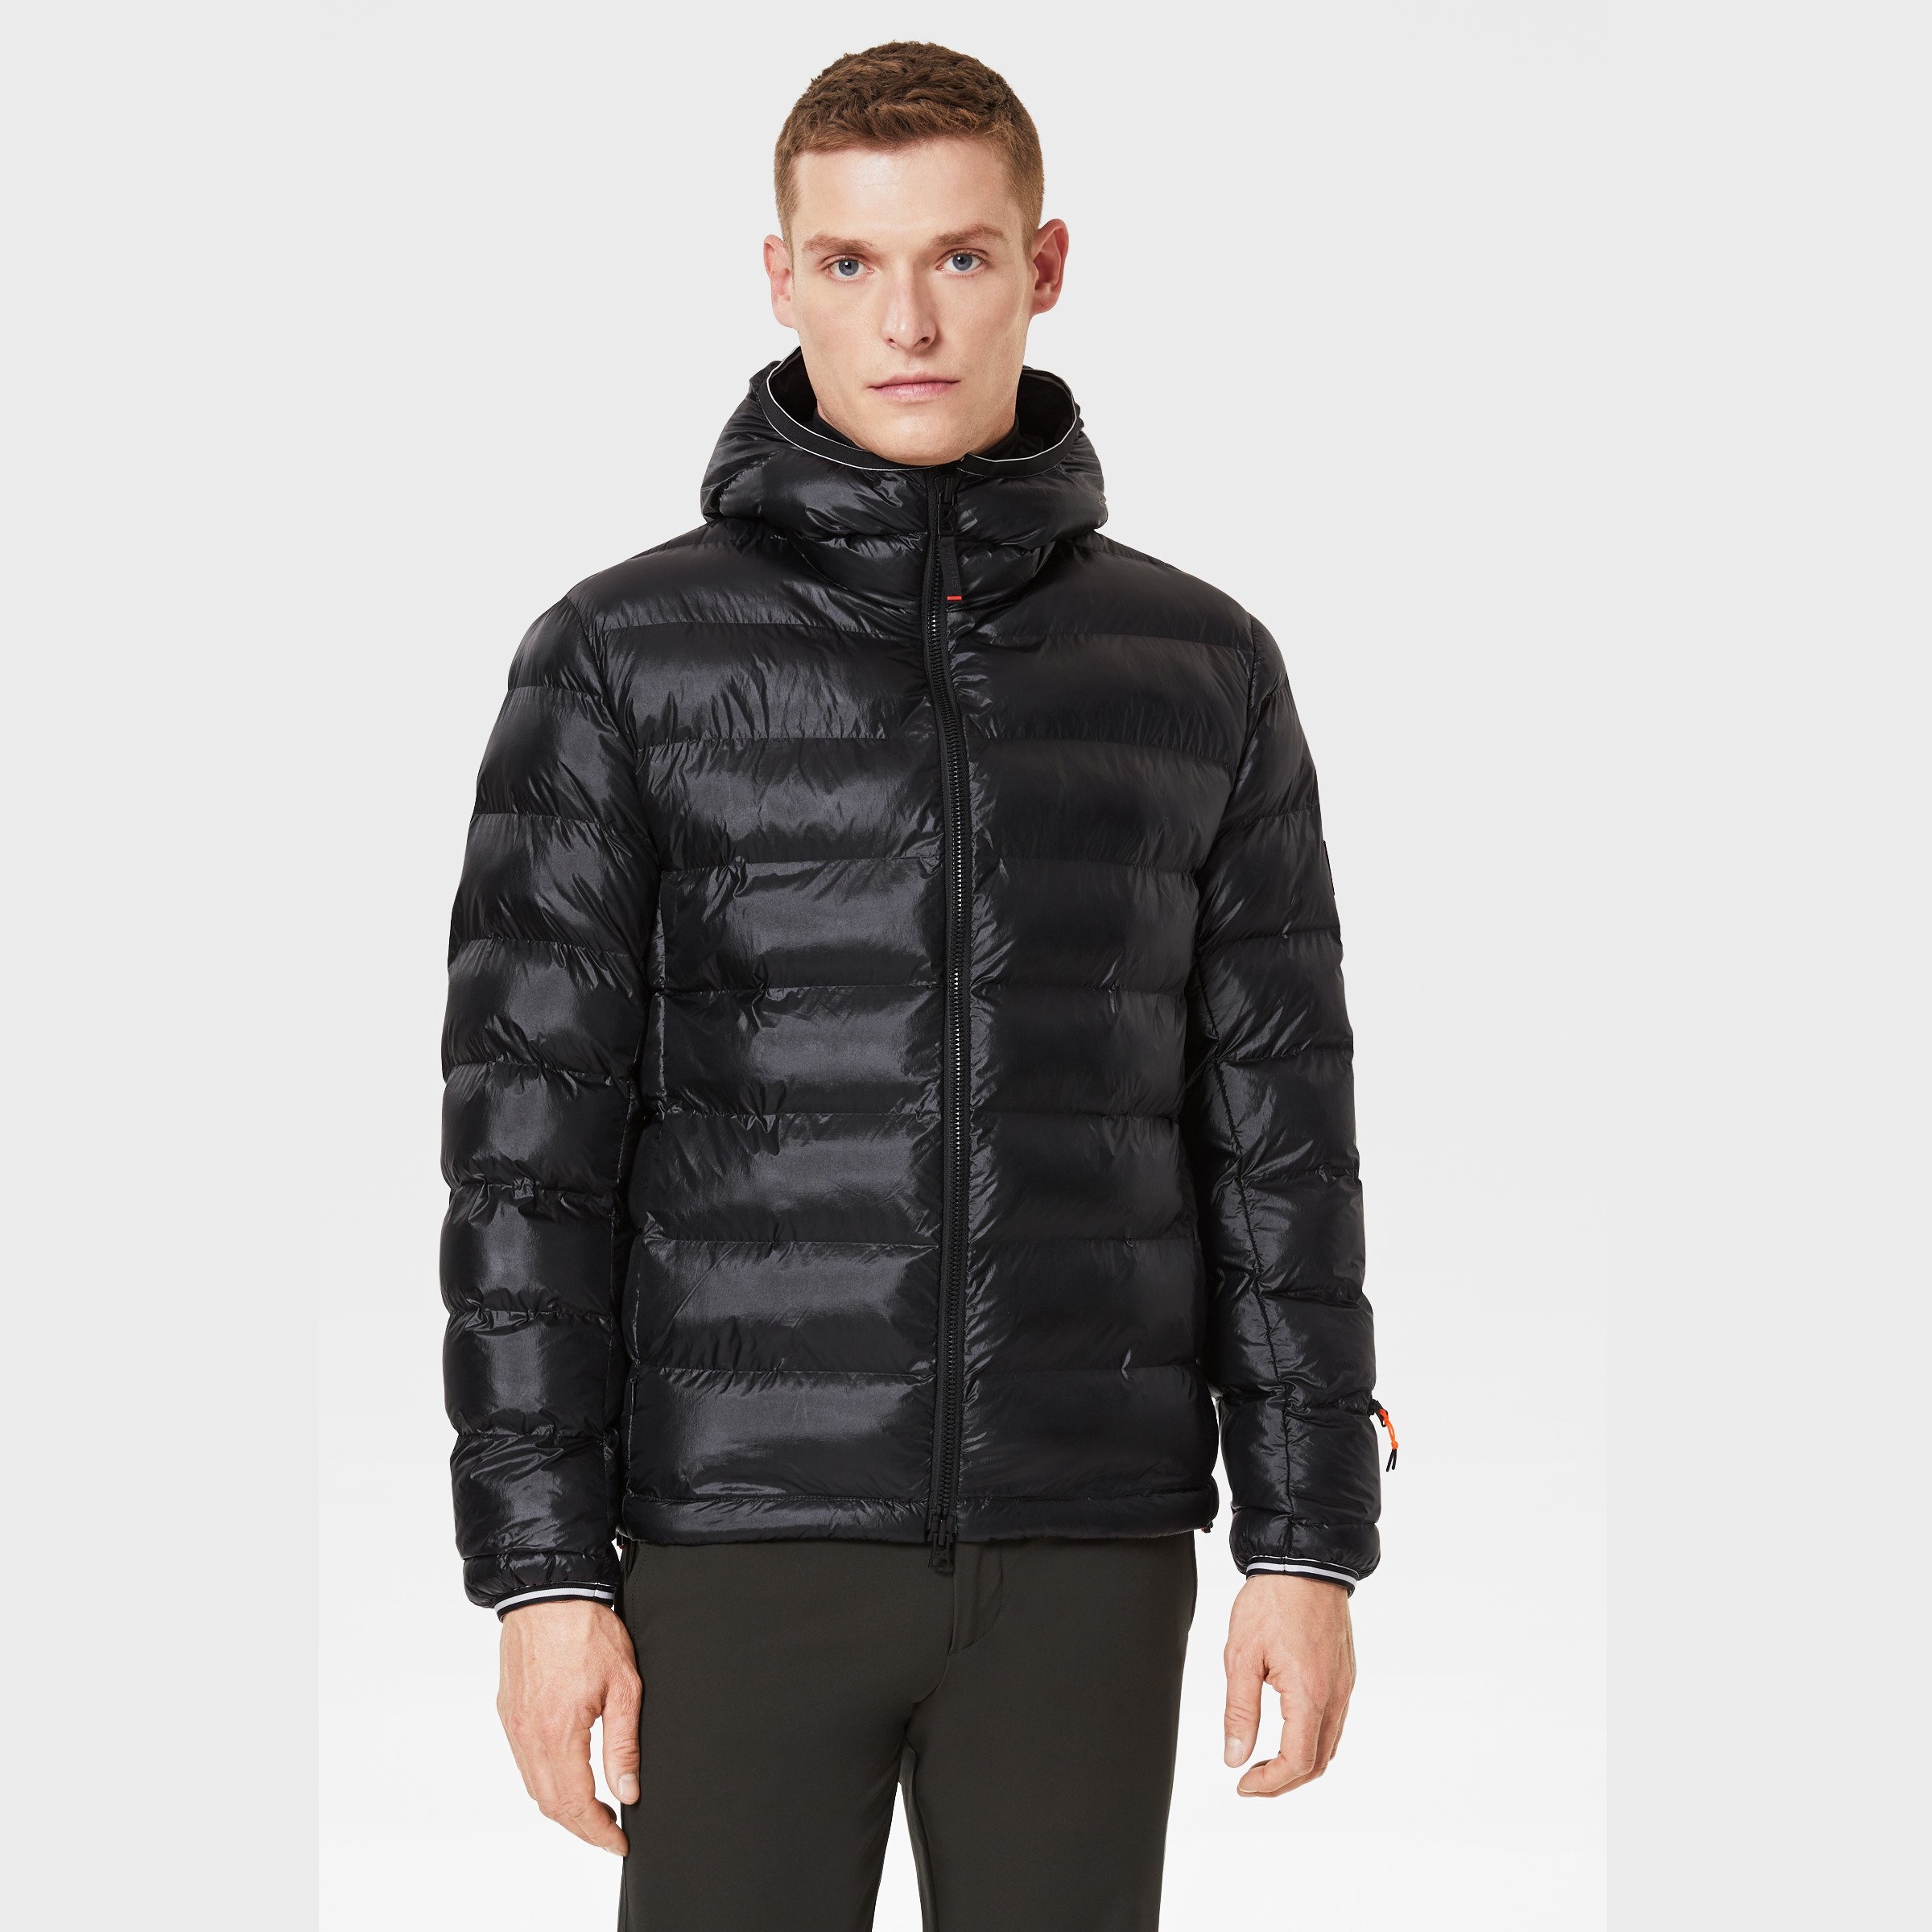 Geci & Veste -  bogner fire and ice SIMO Quilted Jacket